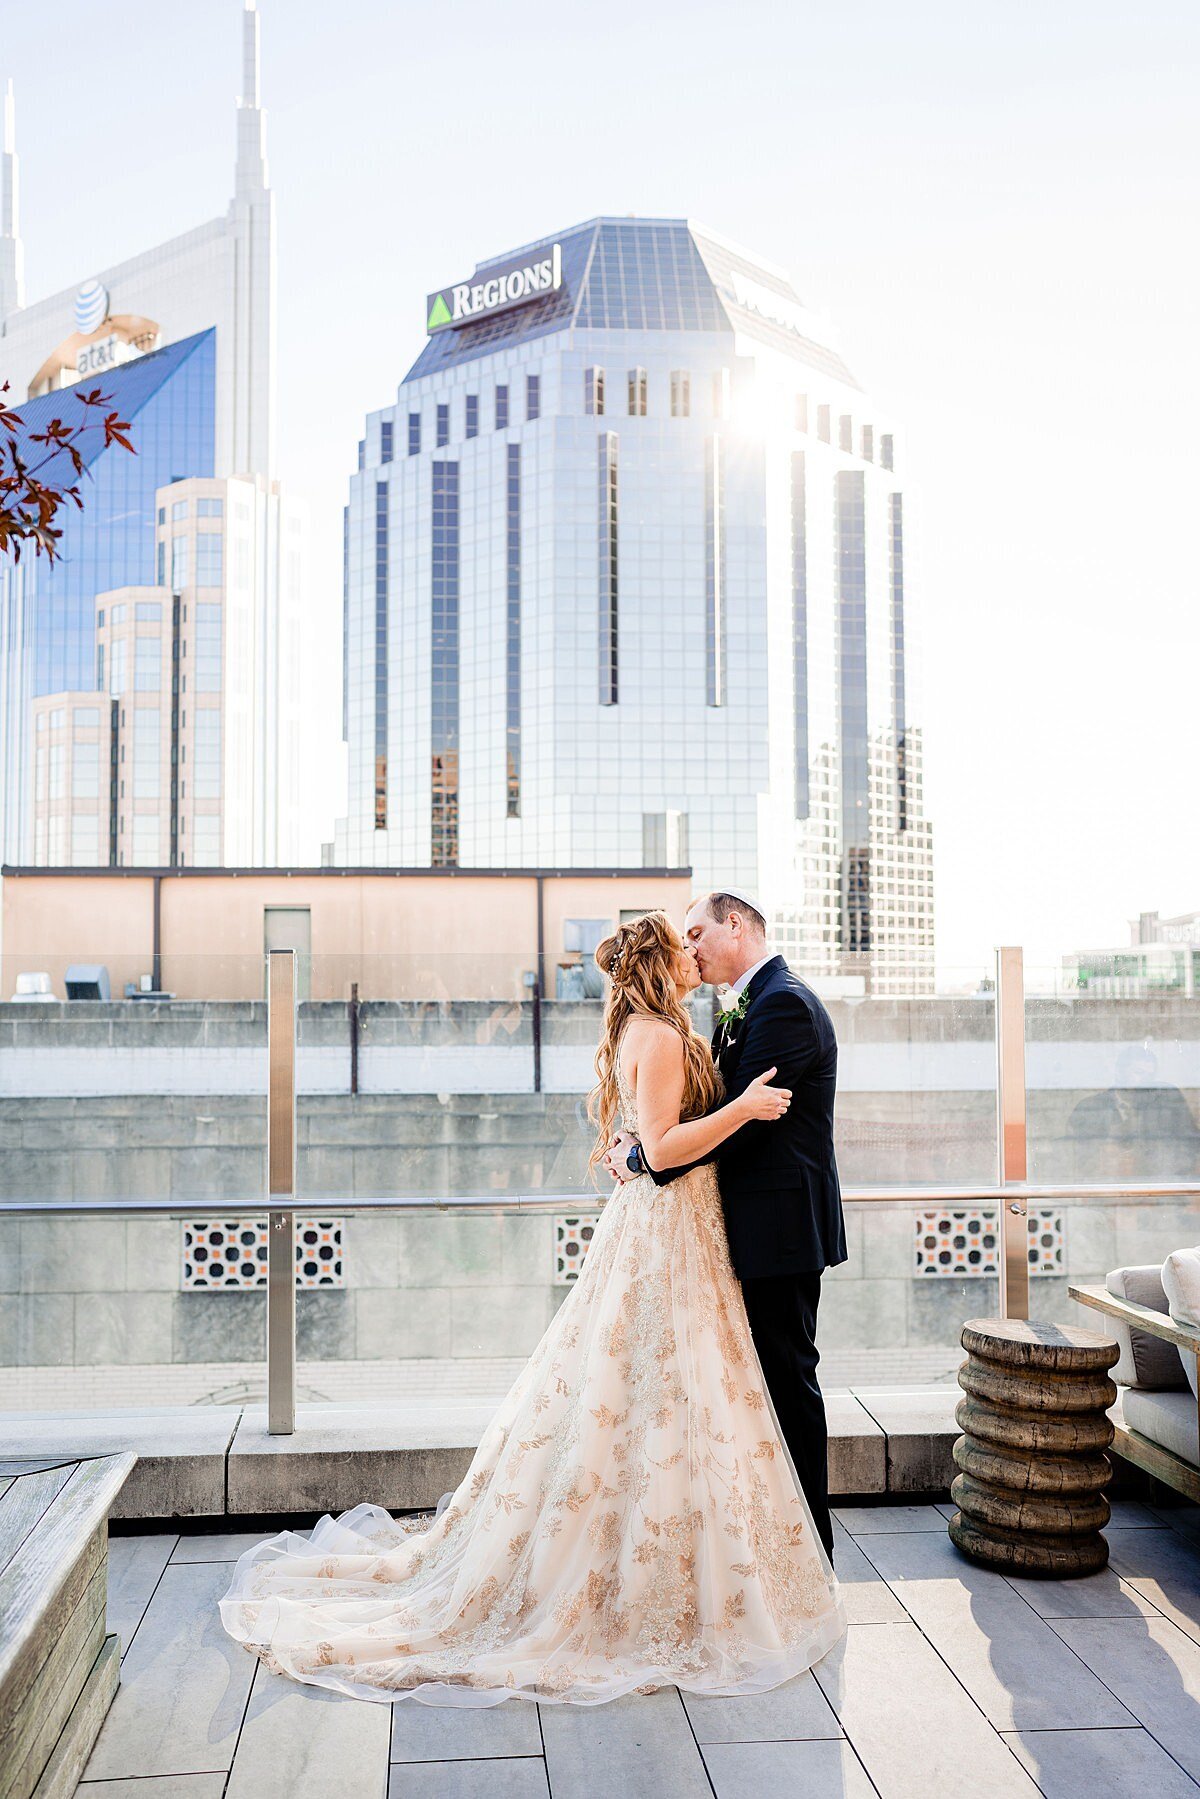 Jewish bride wearing a gold wedding gown and Jewish groom wearing a black tuxedo kiss on the rooftop of the Noelle Hotel in Nashville, TN with the Nashville Skyline in the background